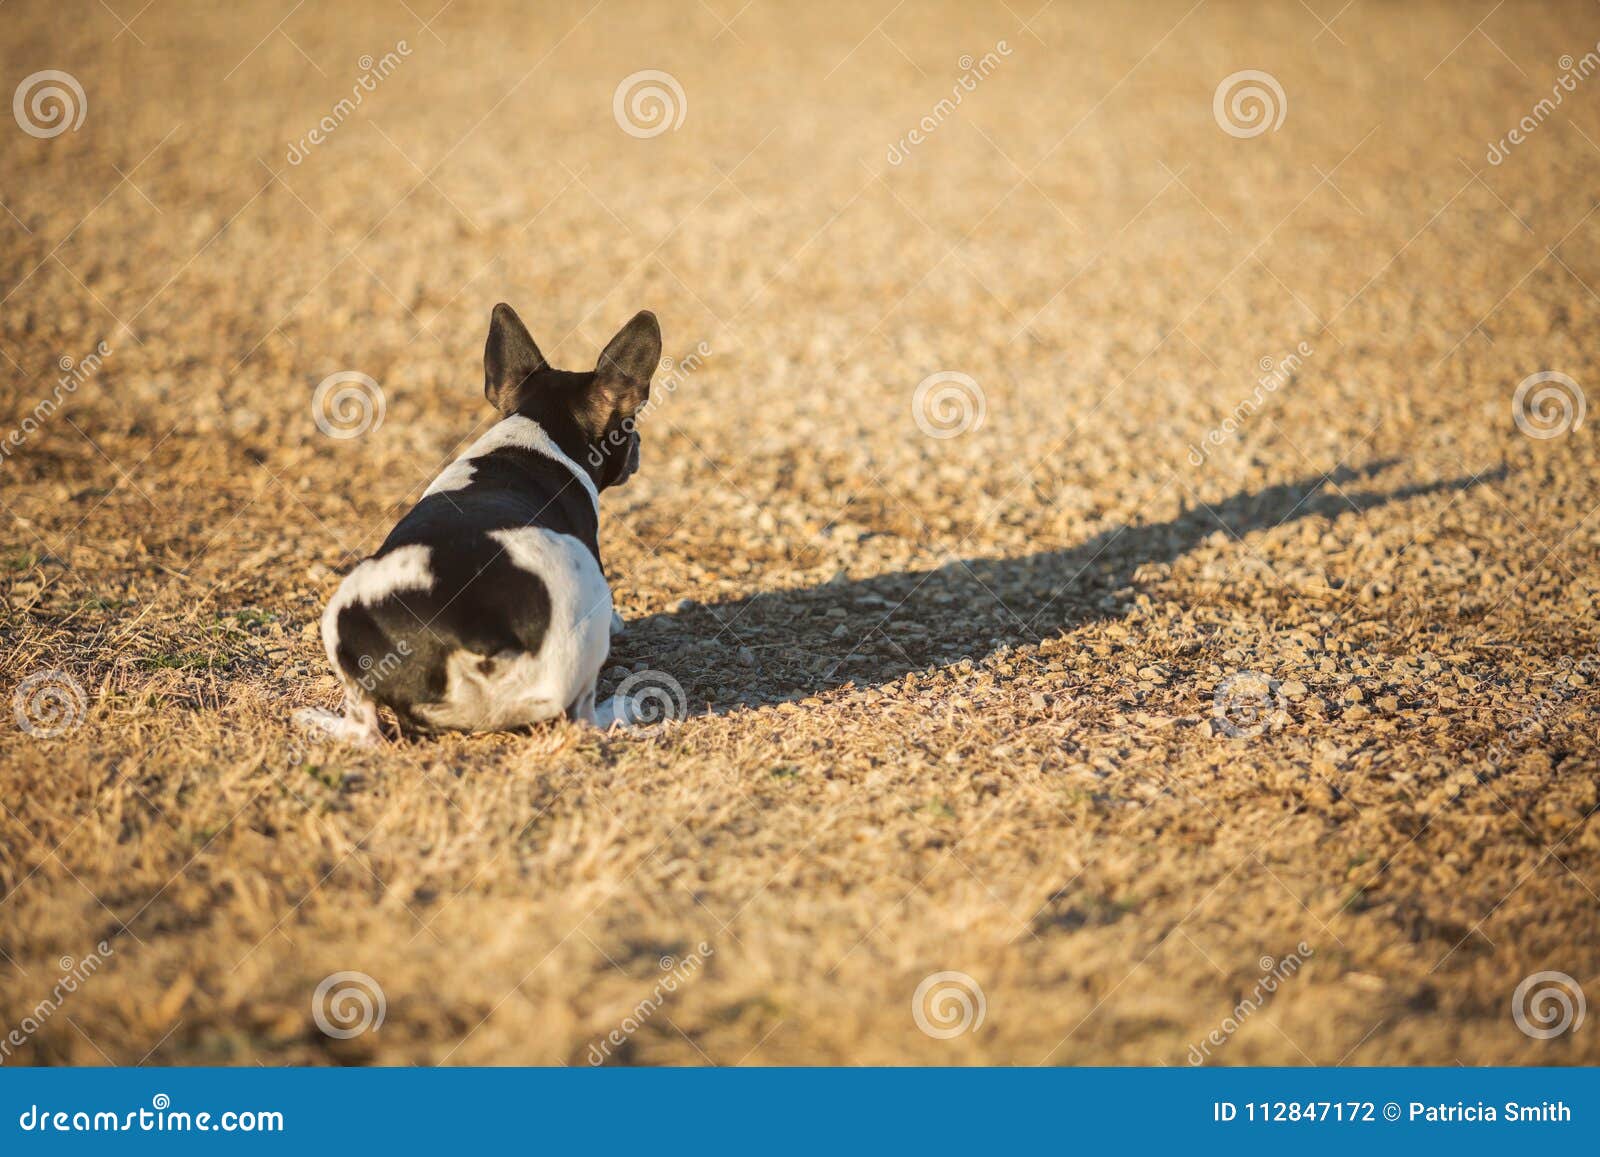 crouched rat terrier dog